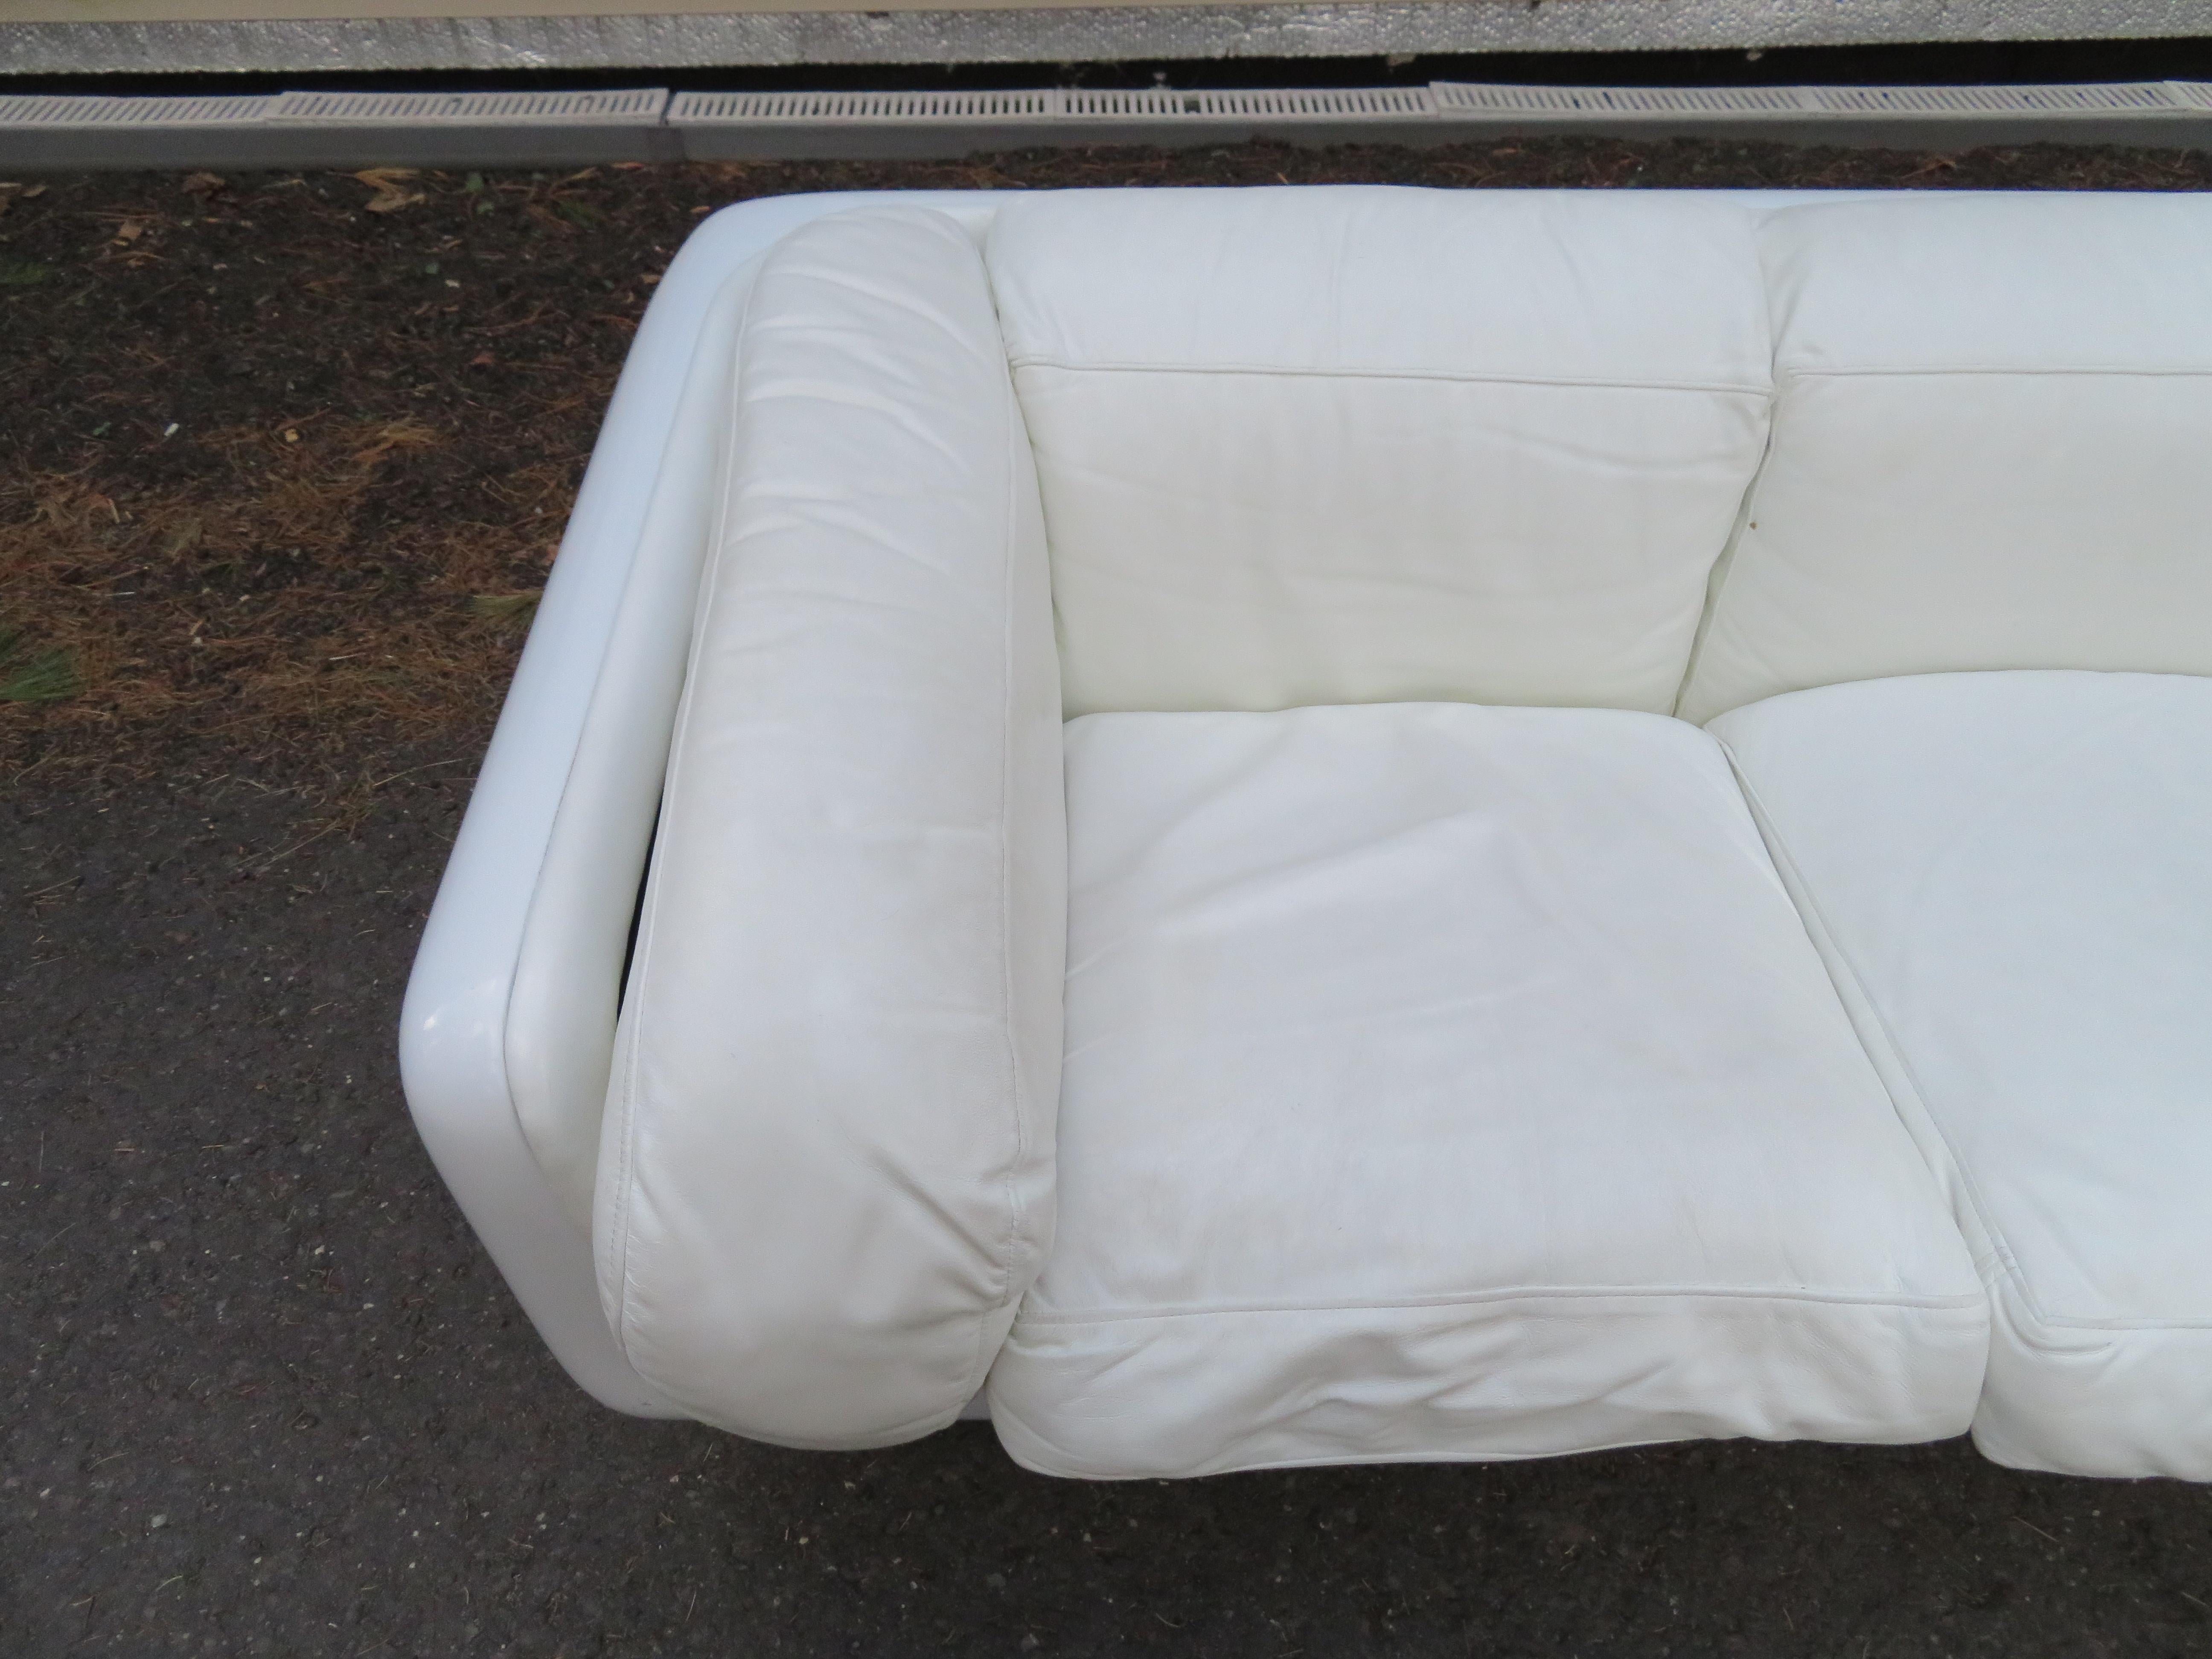 space age couch